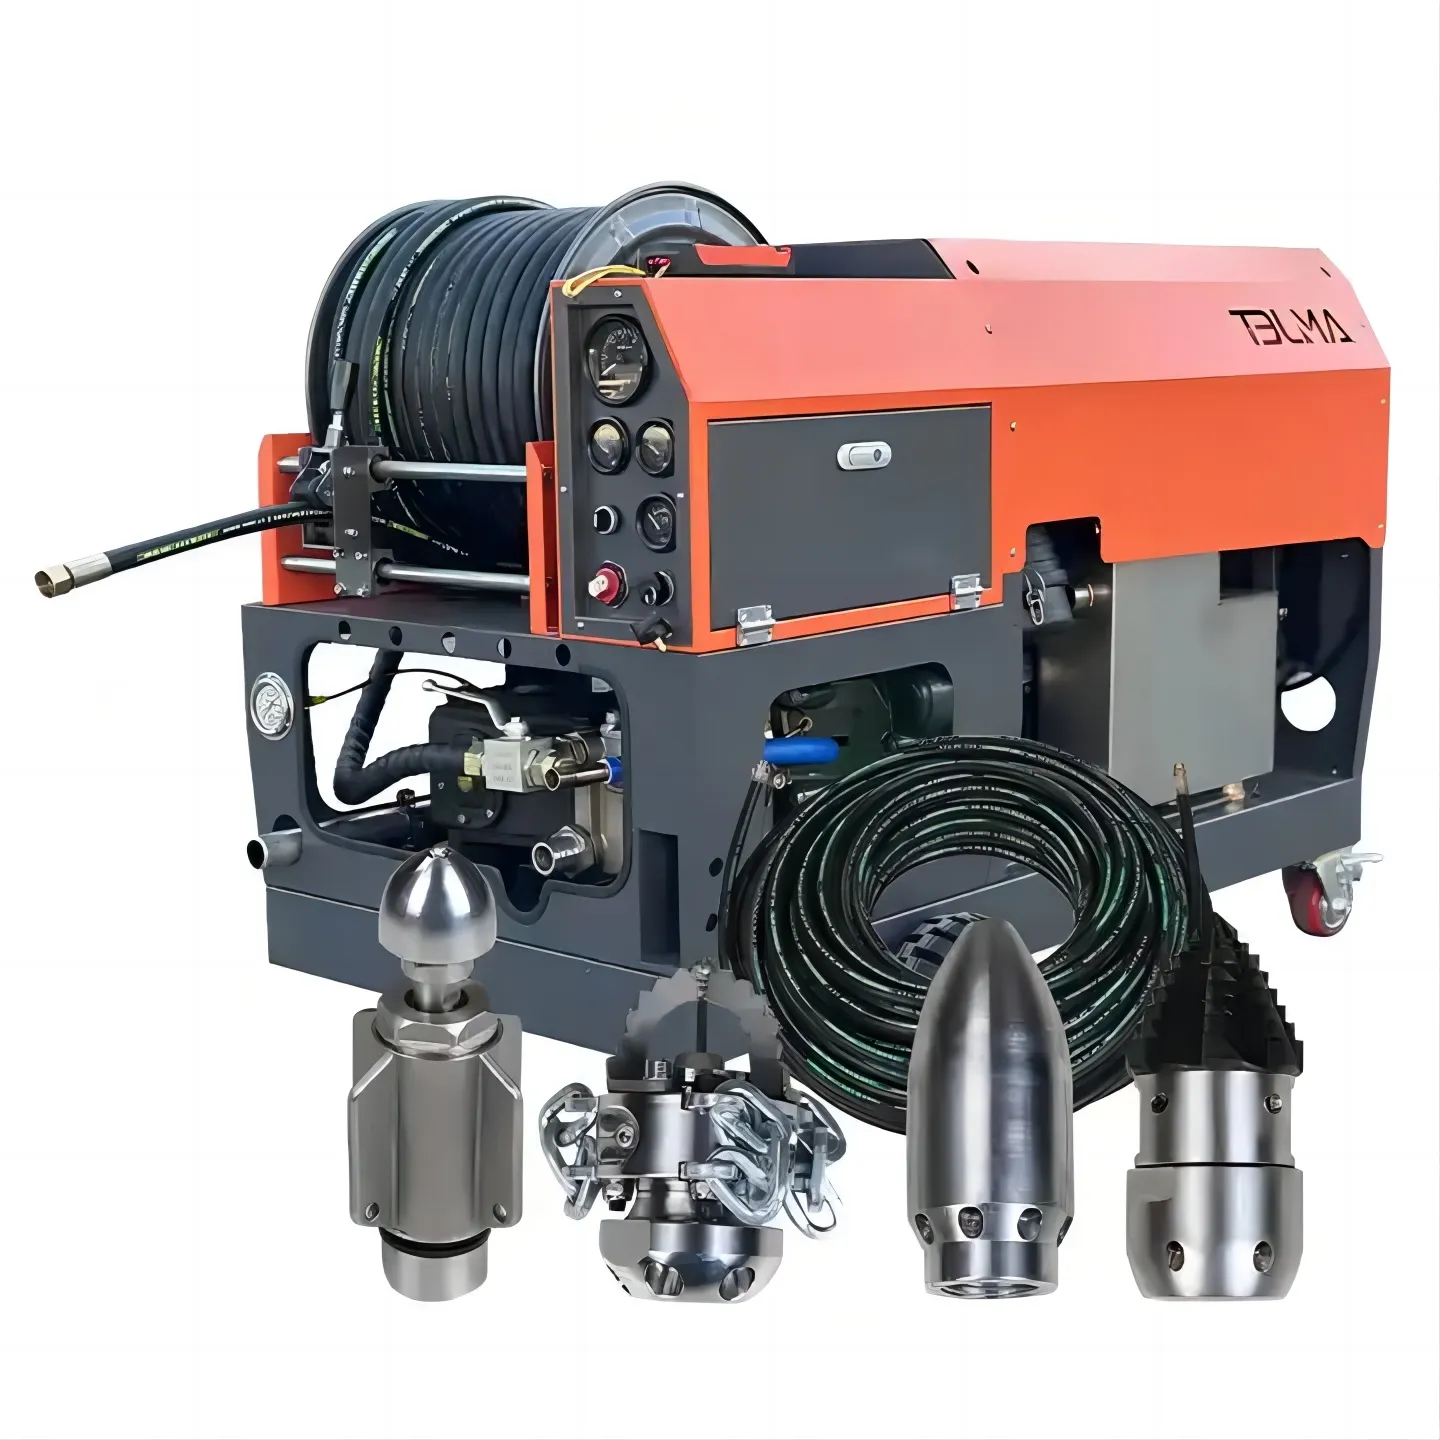 High quality high-pressure water jet sewage cleaning machine top end 45.6KW 3000psi sewage jet cleaning machine